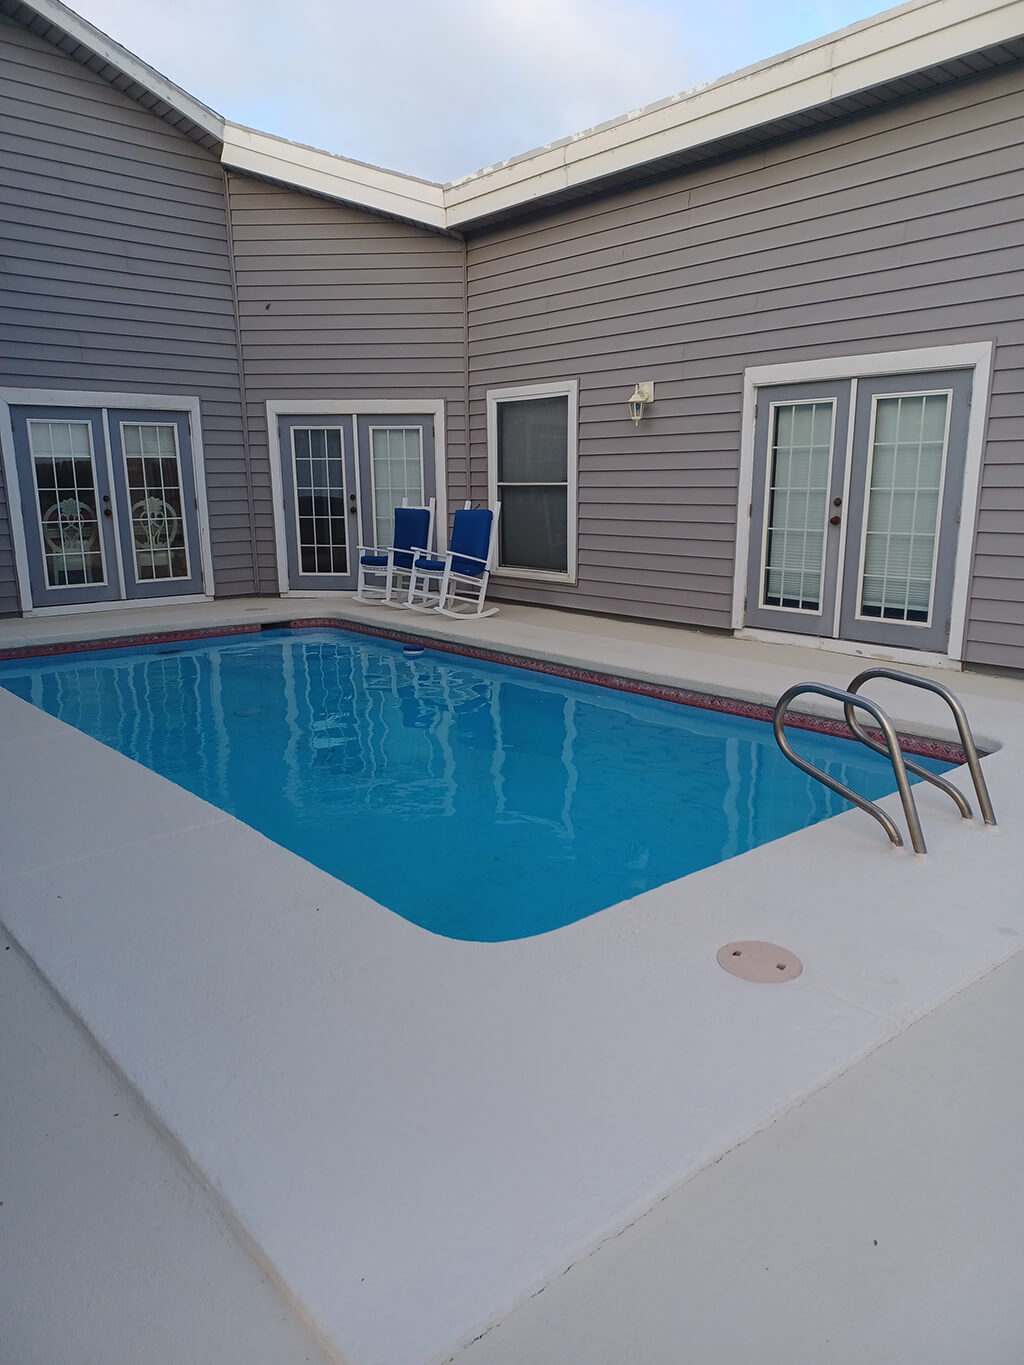 Before and After images of Pool Paint